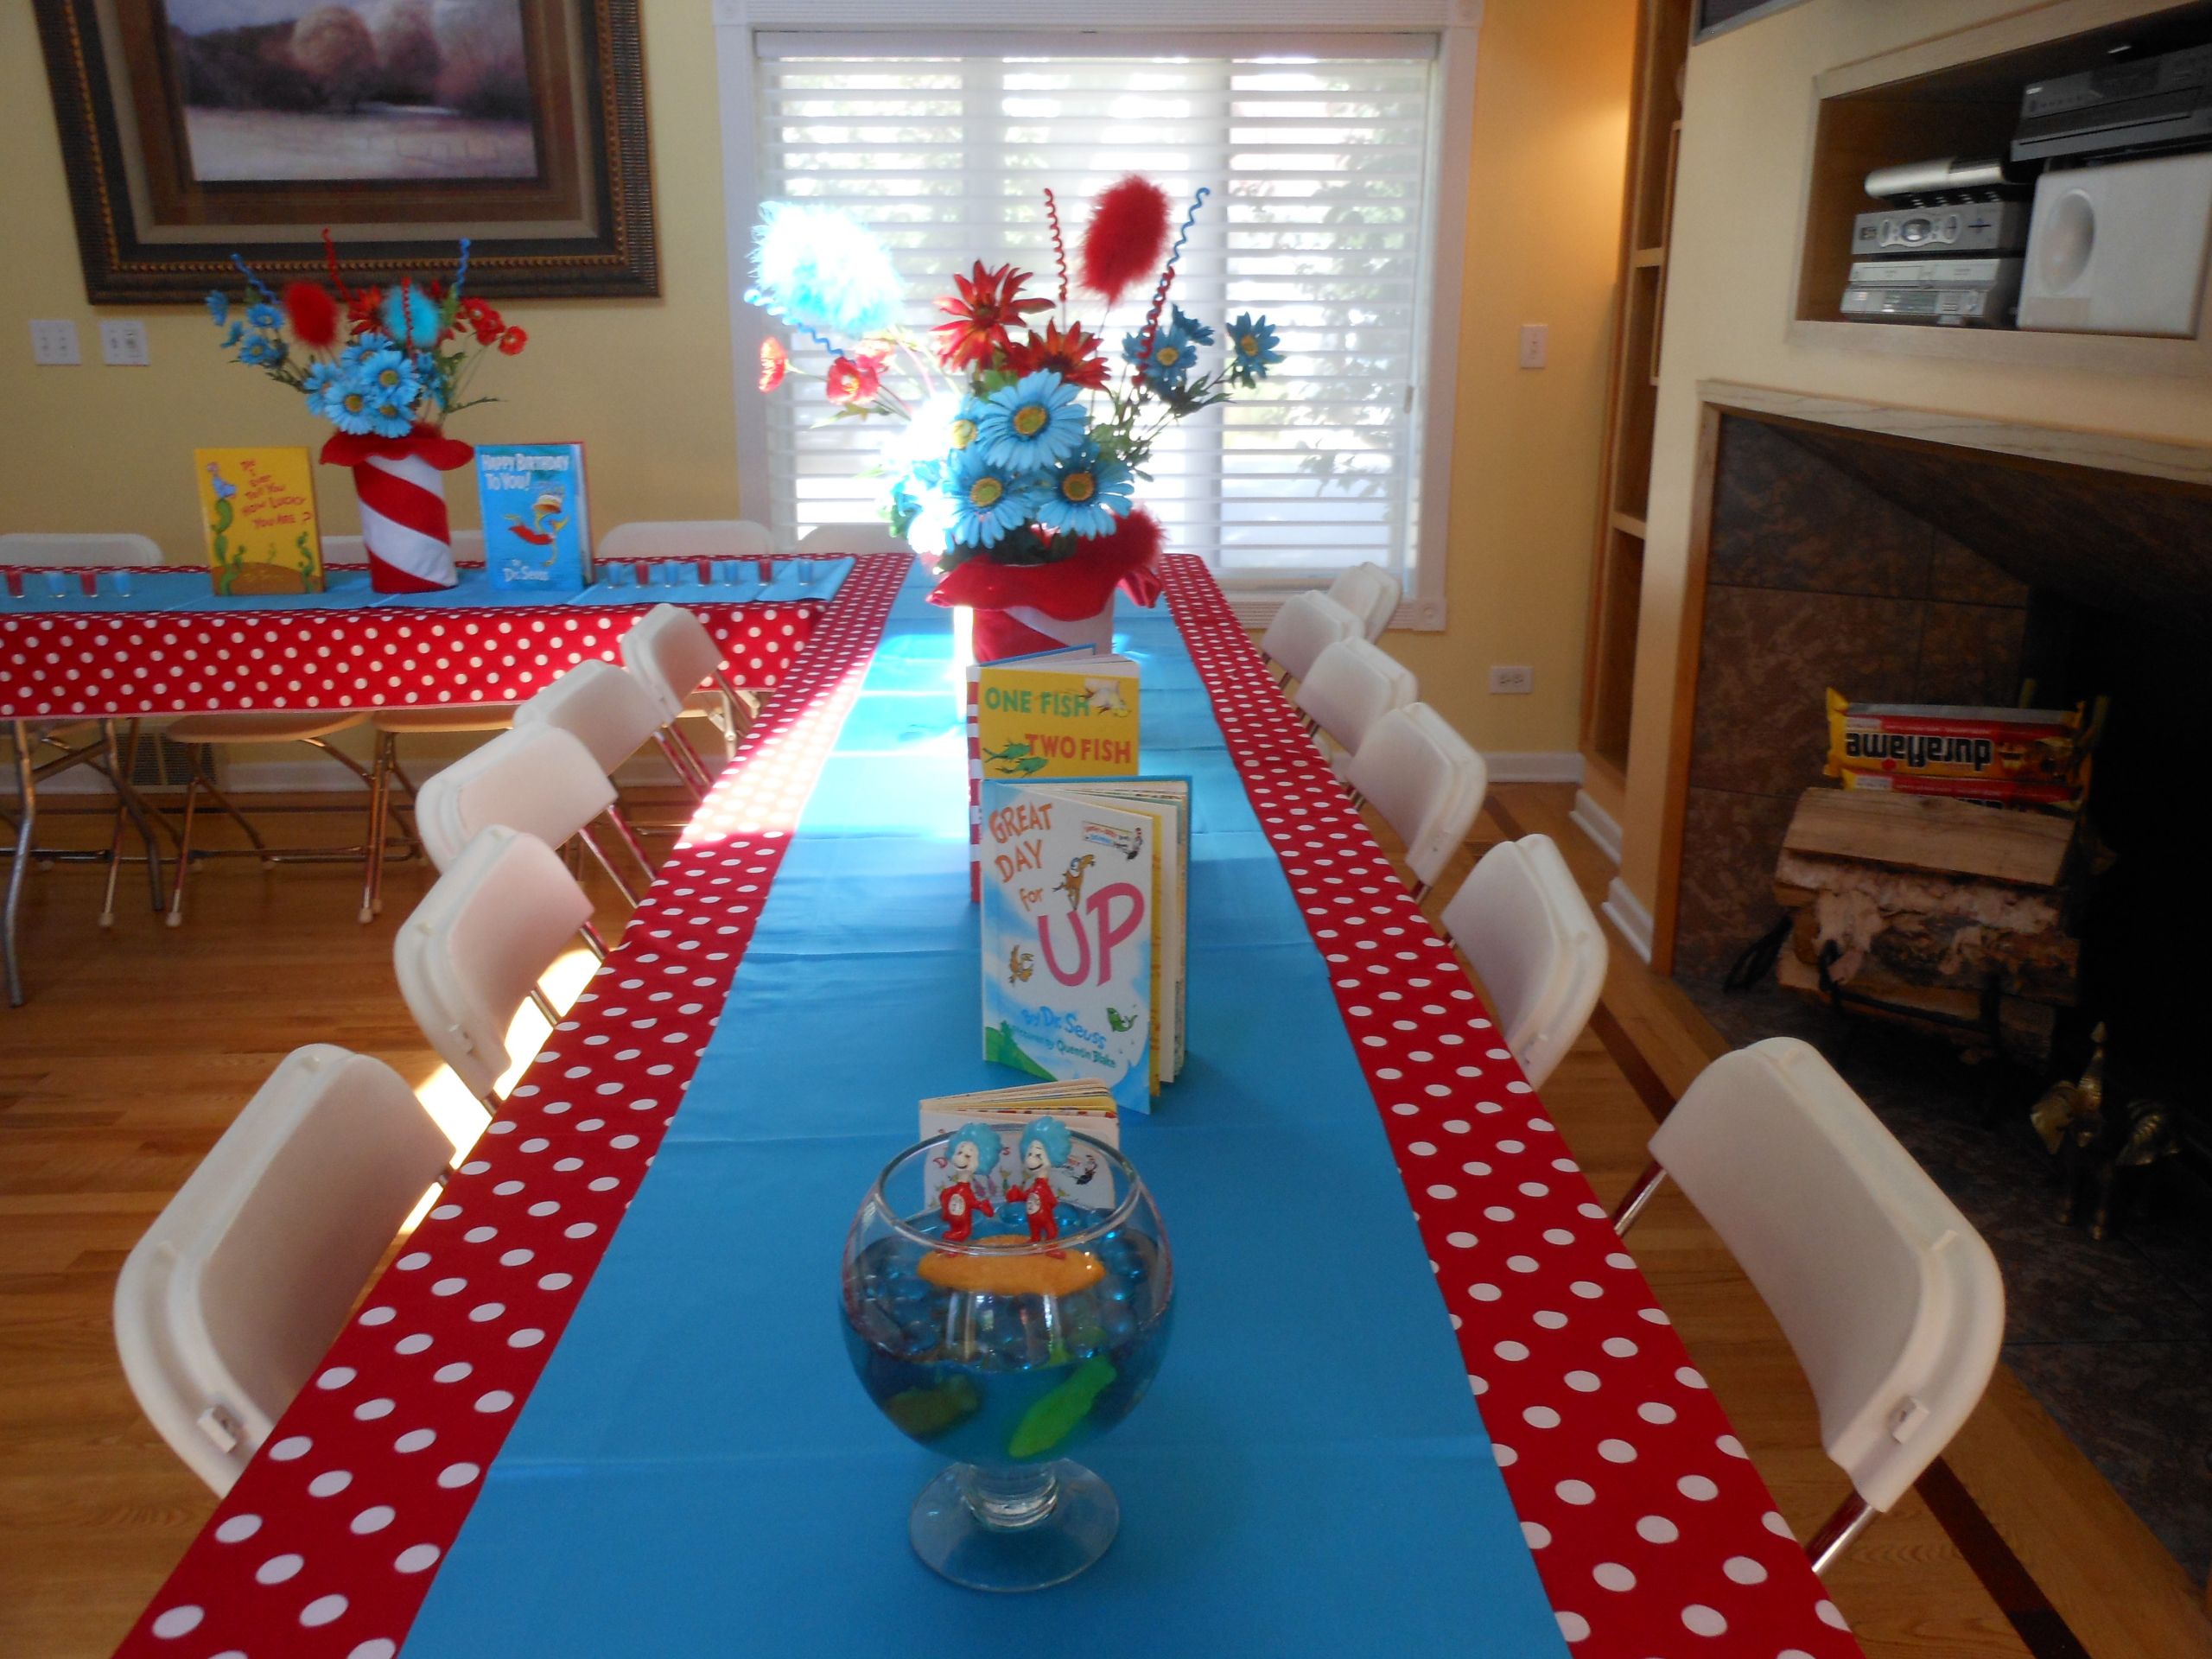 Dr Seuss Baby Shower Decor
 Dr Seuss Thing 1 and Thing 2 Baby Shower